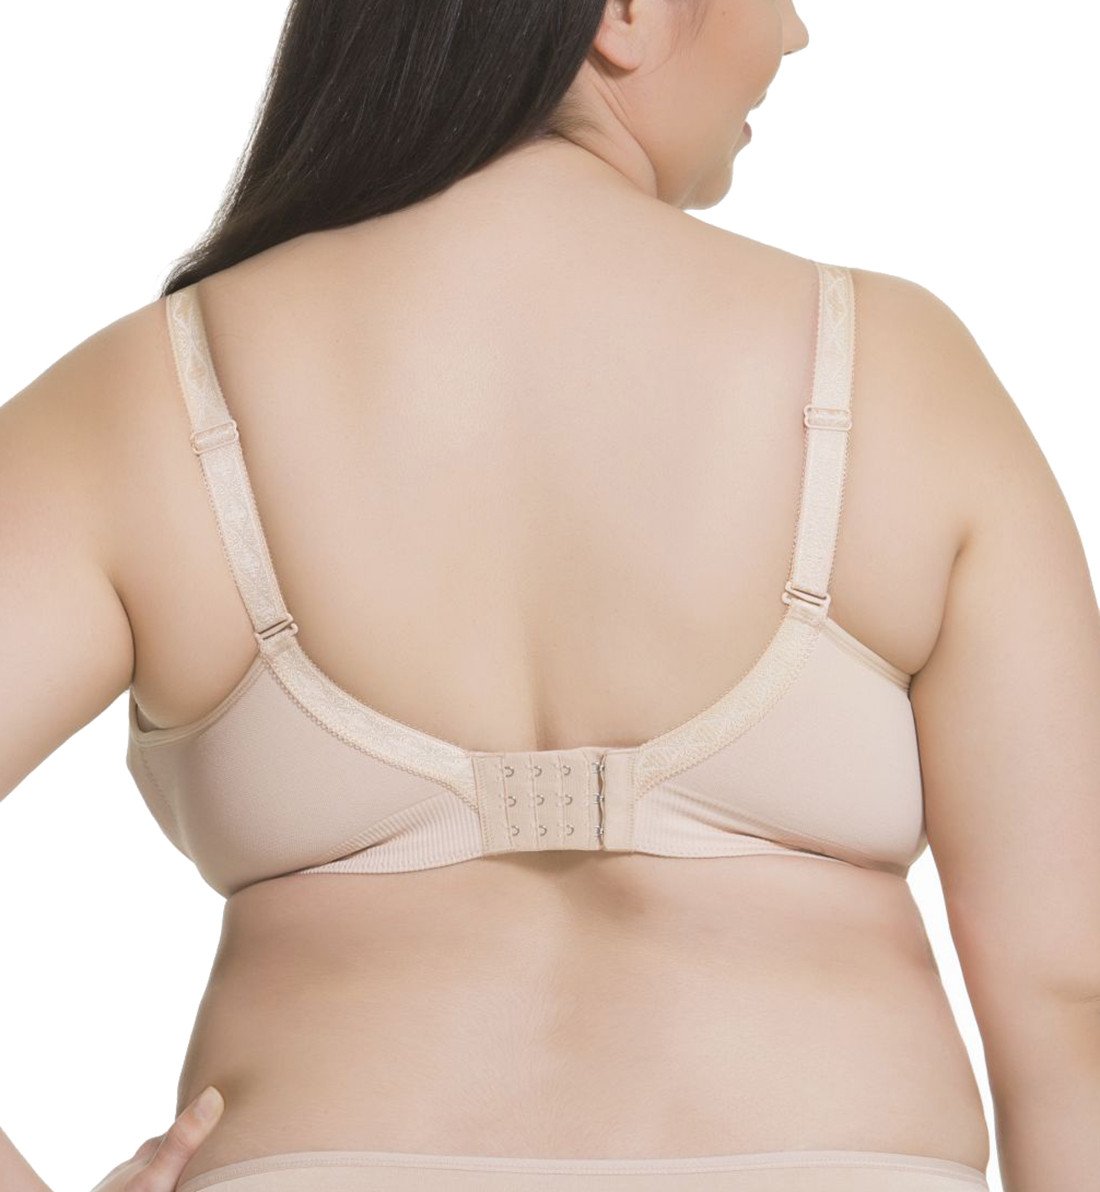 Sugar Candy by Cake Seamless Fuller Bust Everyday Softcup G-L (28-8005),30XS,Nude - Nude,XS